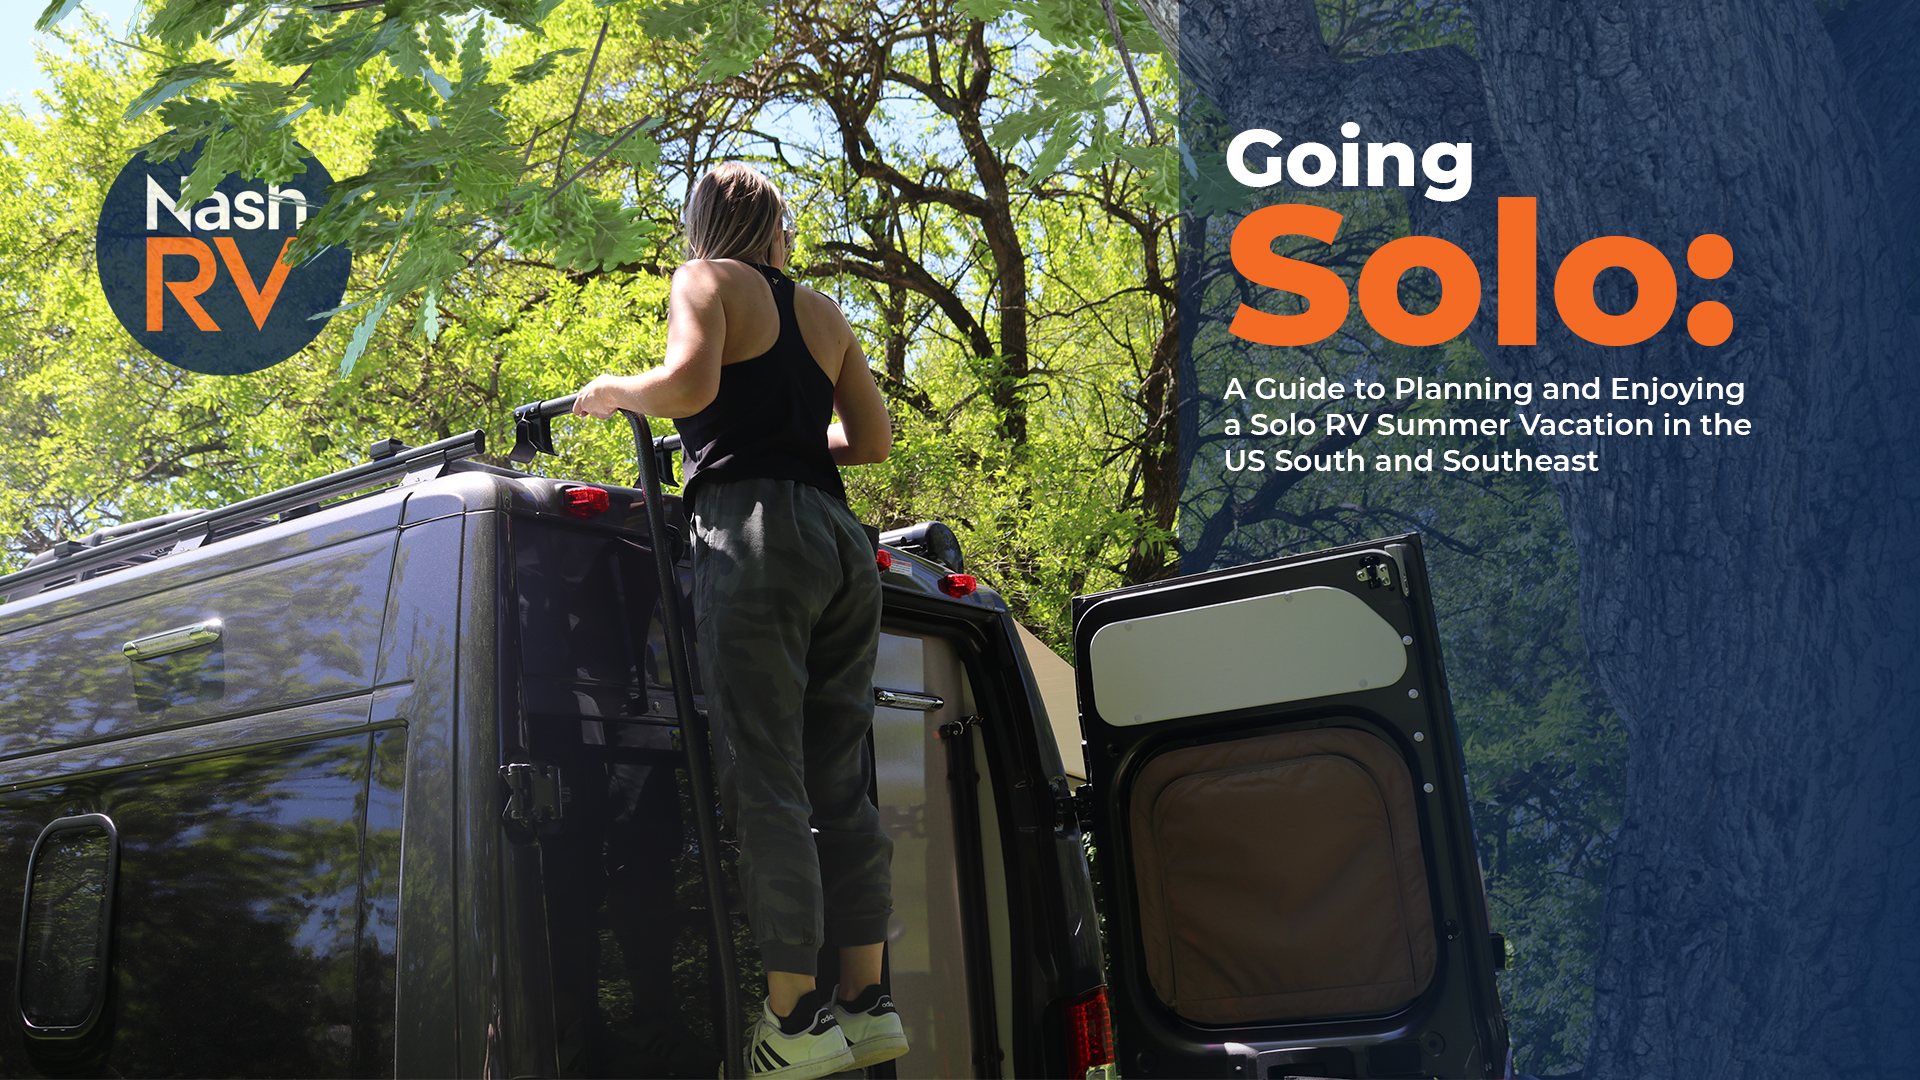 Going Solo: A Guide to Planning and Enjoying a Solo RV Summer Vacation in the US South and Southeast